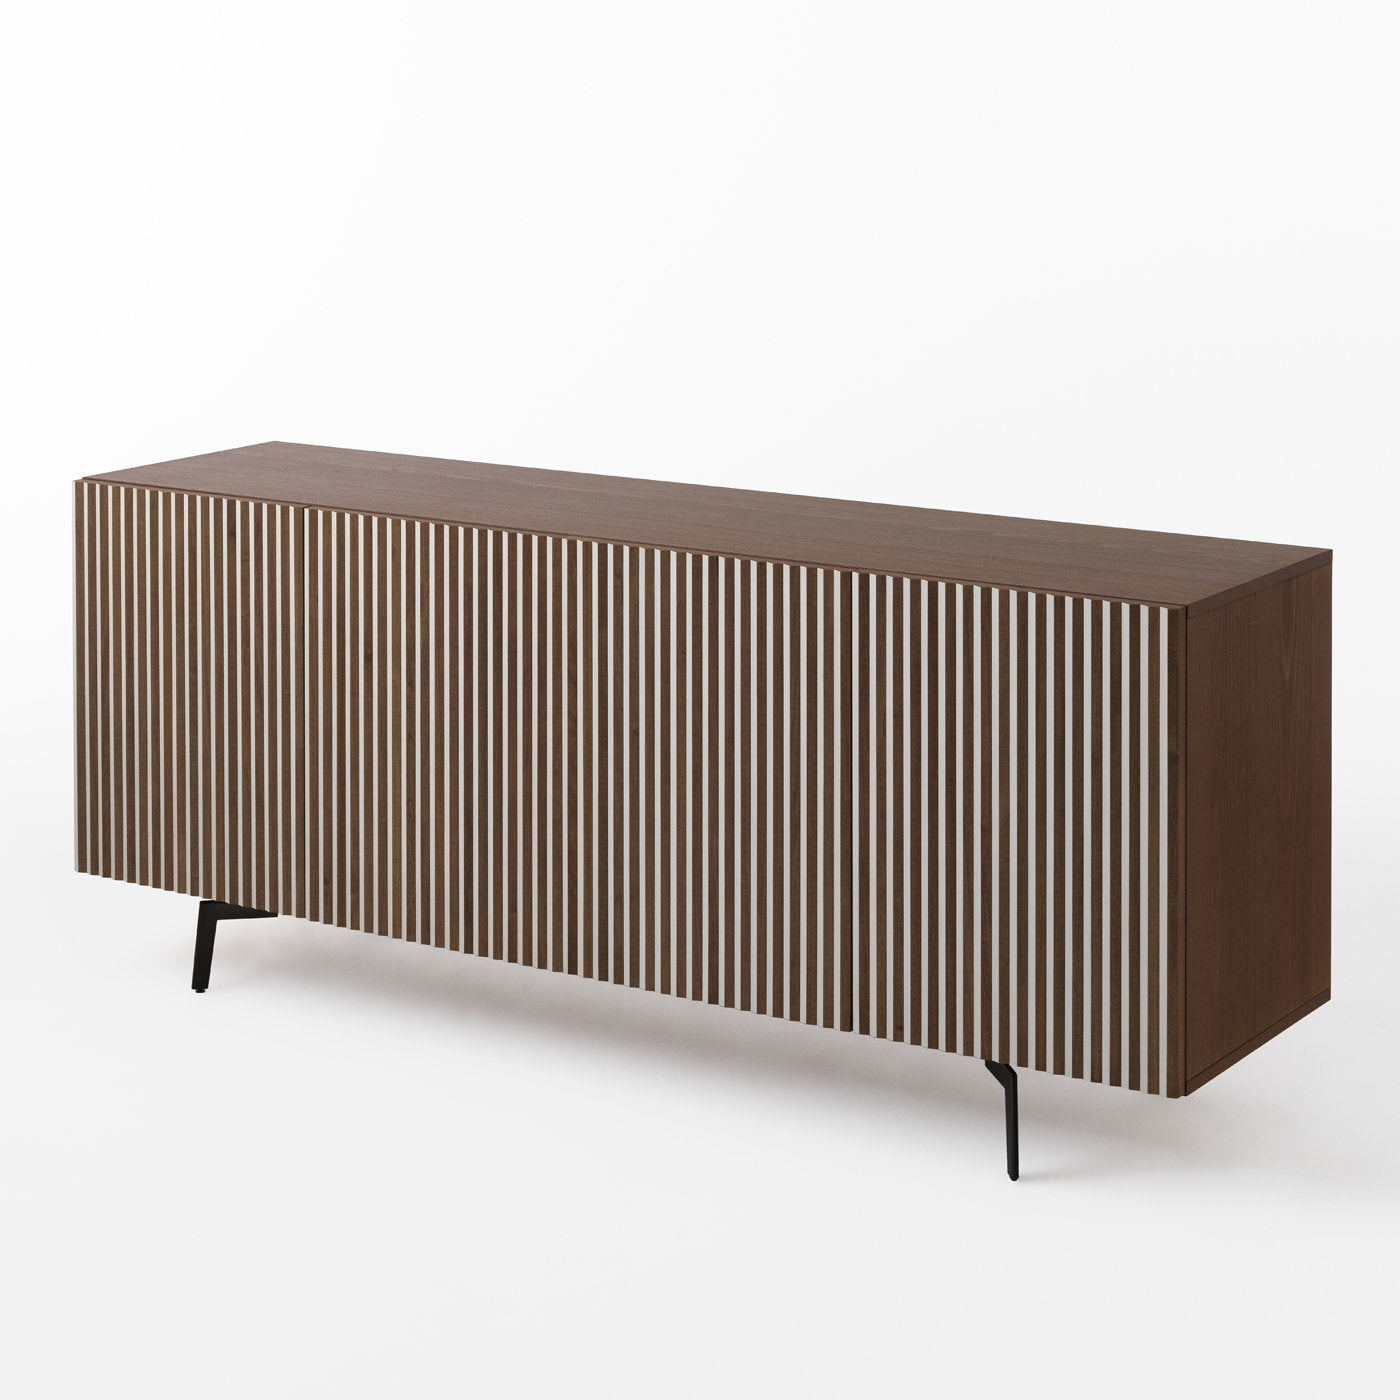 Leon Decor Blonde Sideboard by StH - Alternative view 1